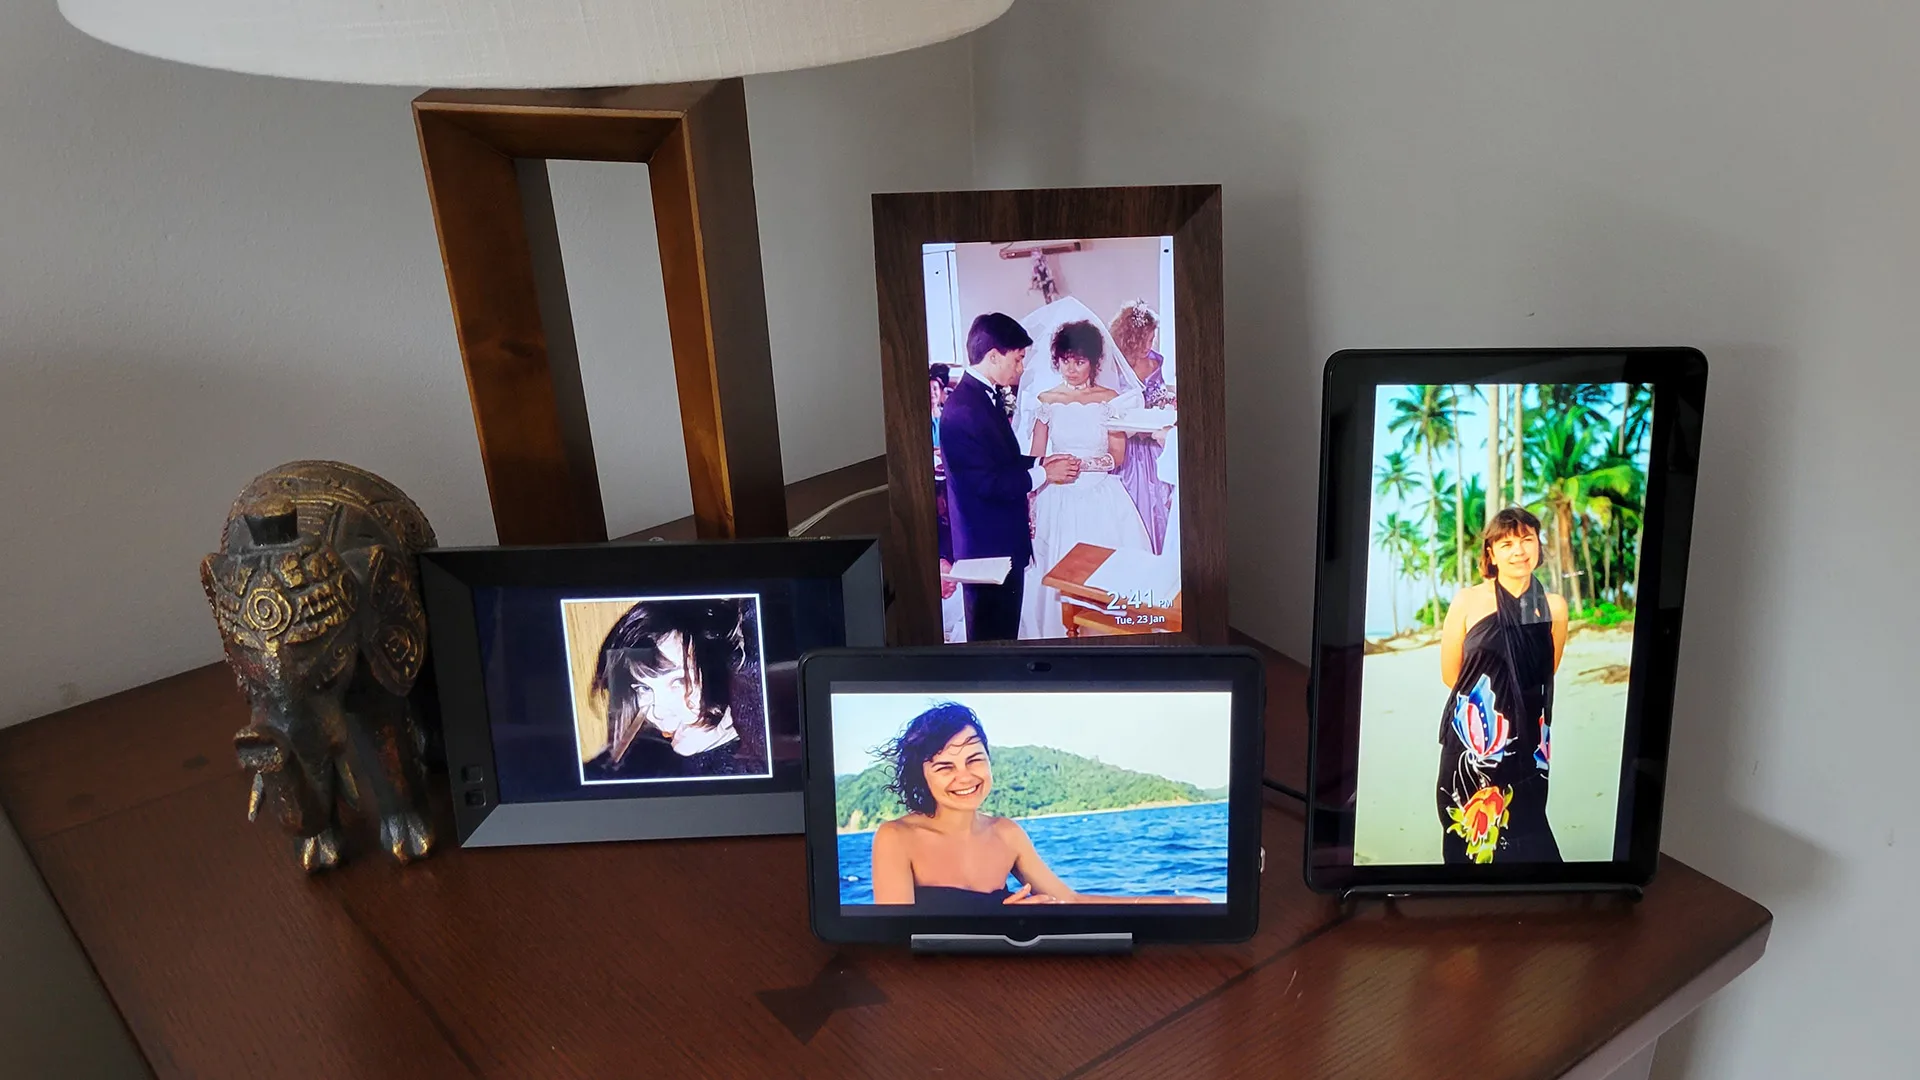 Image showing CURA and other digital photo frames